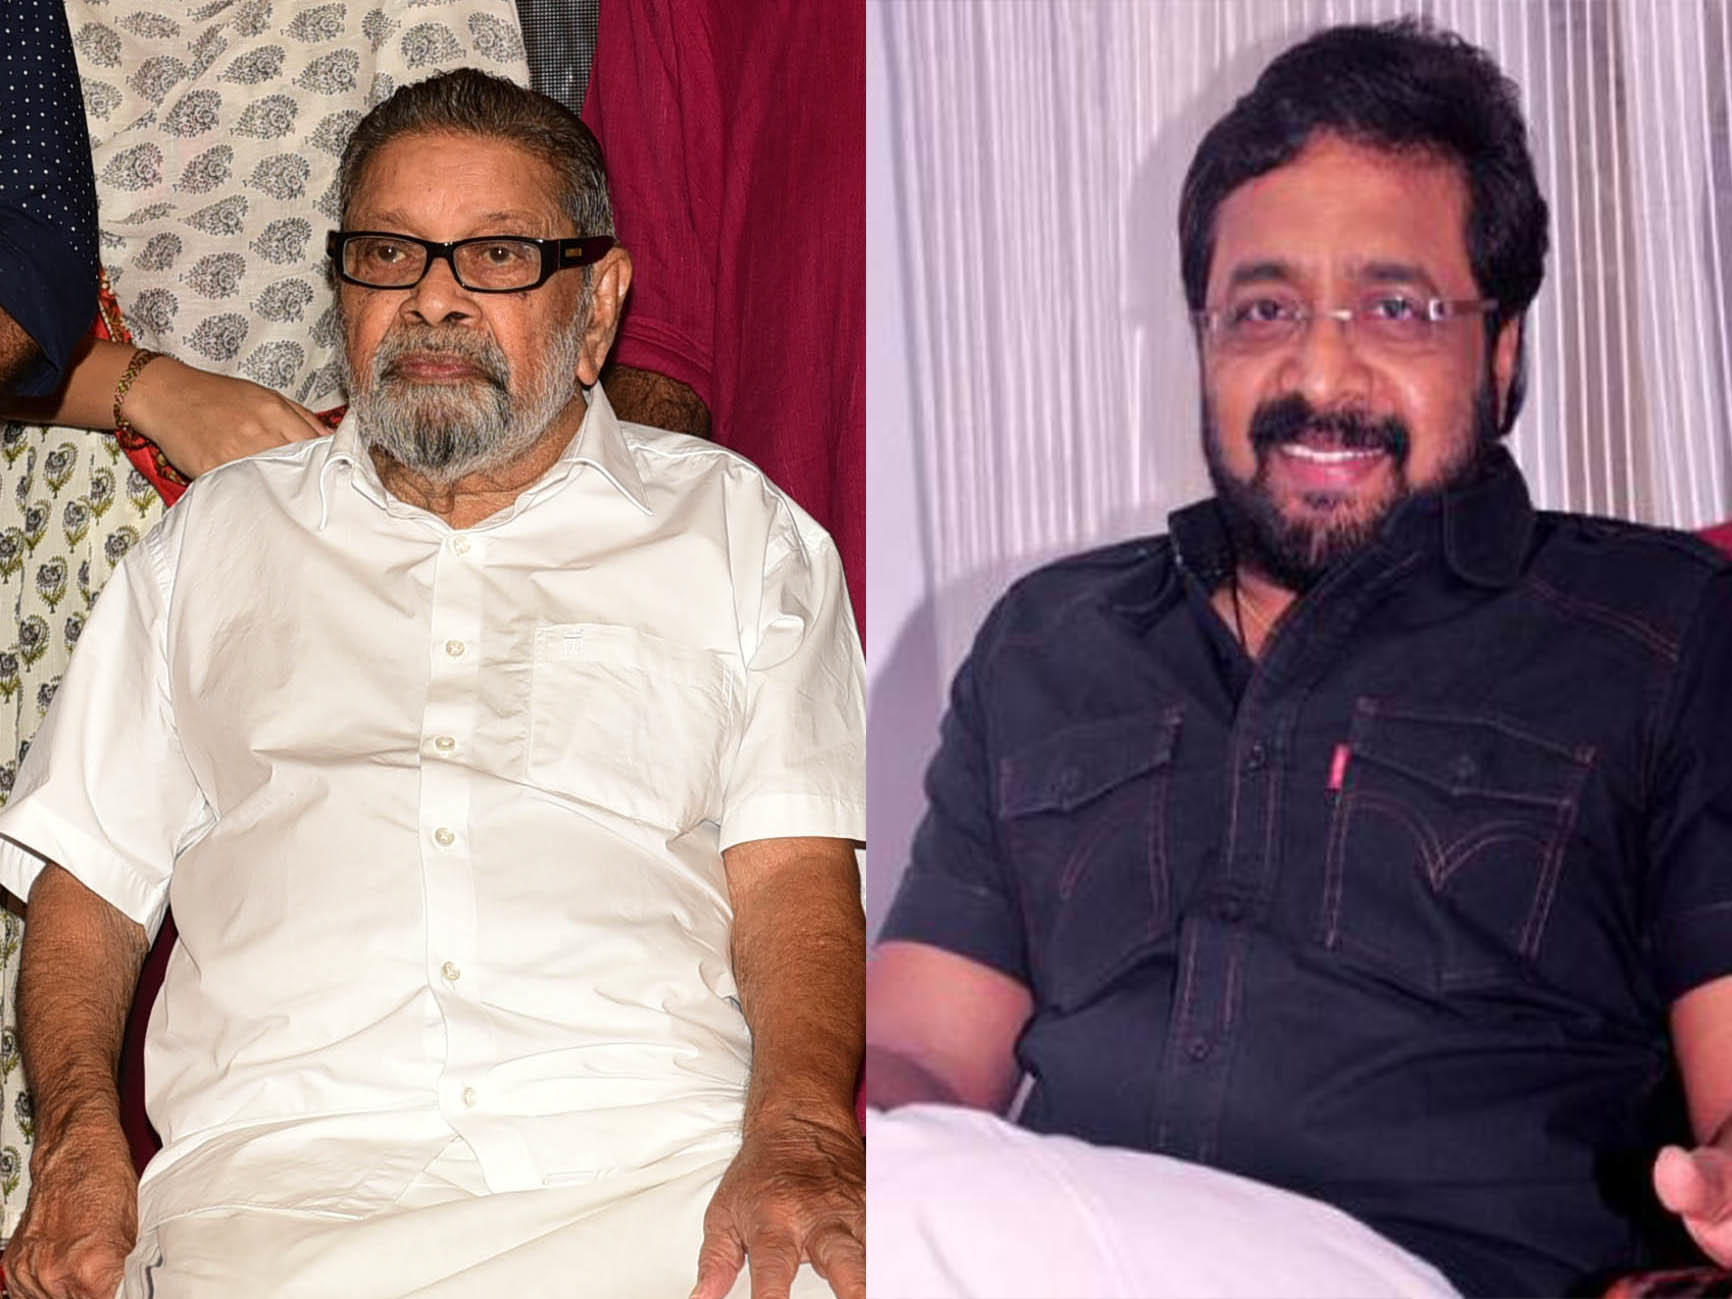 Renji Panicker reminisces his encounter with musician Arjunan Master, in a lift